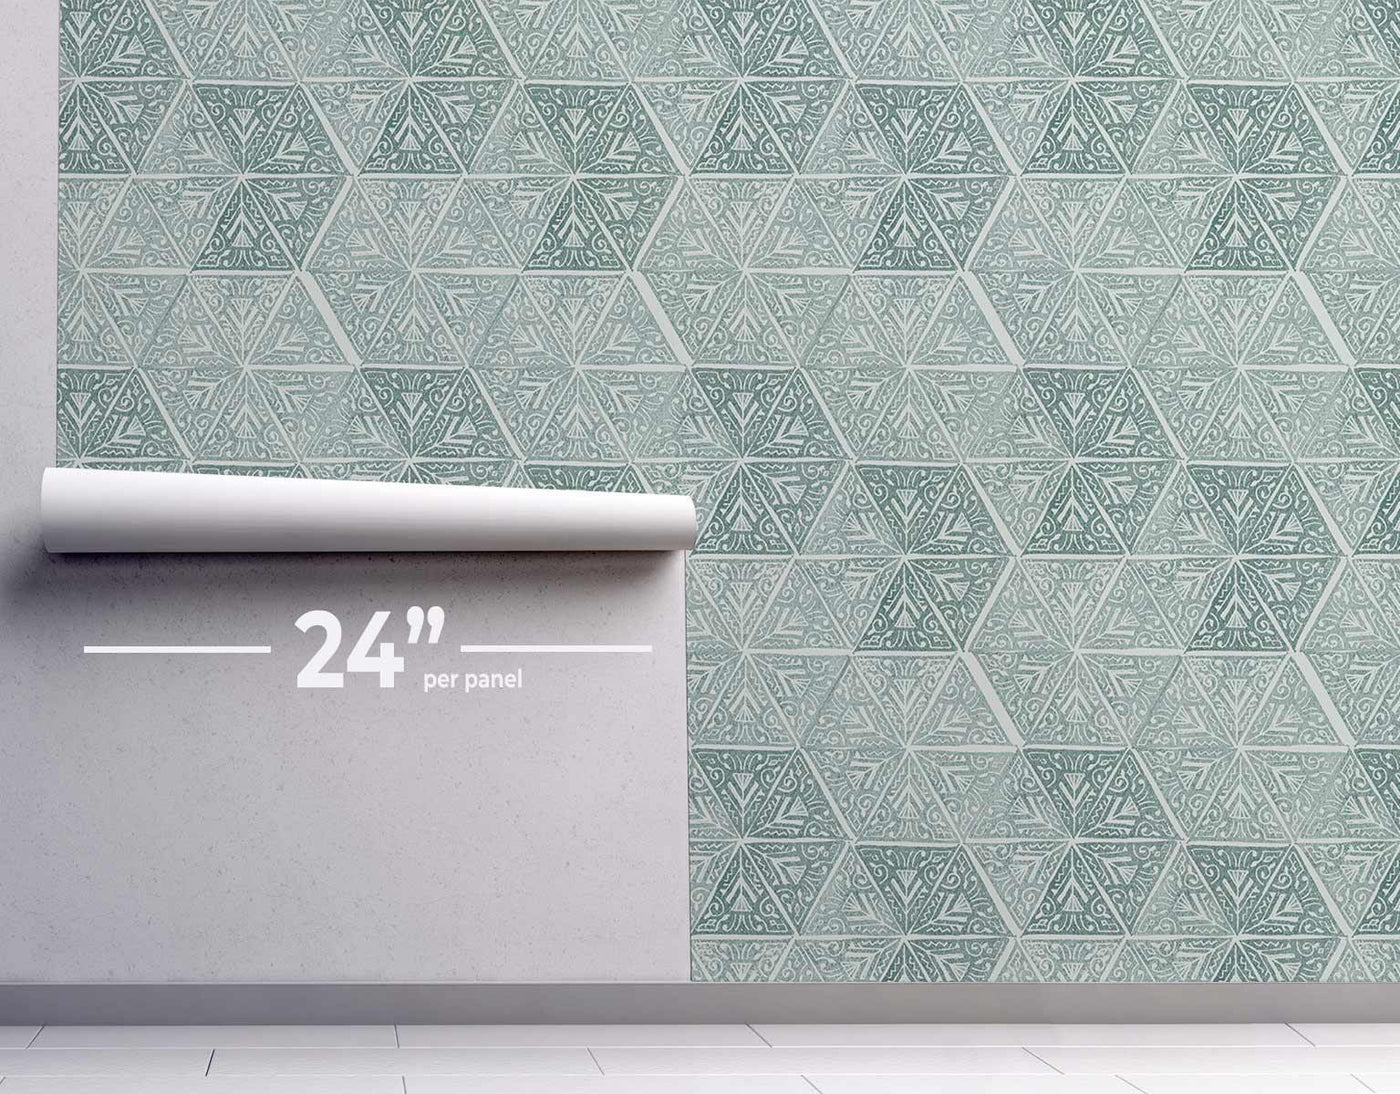 Floral Triangles Wallpaper #317-Repeat Pattern Wallpaper-Eazywallz